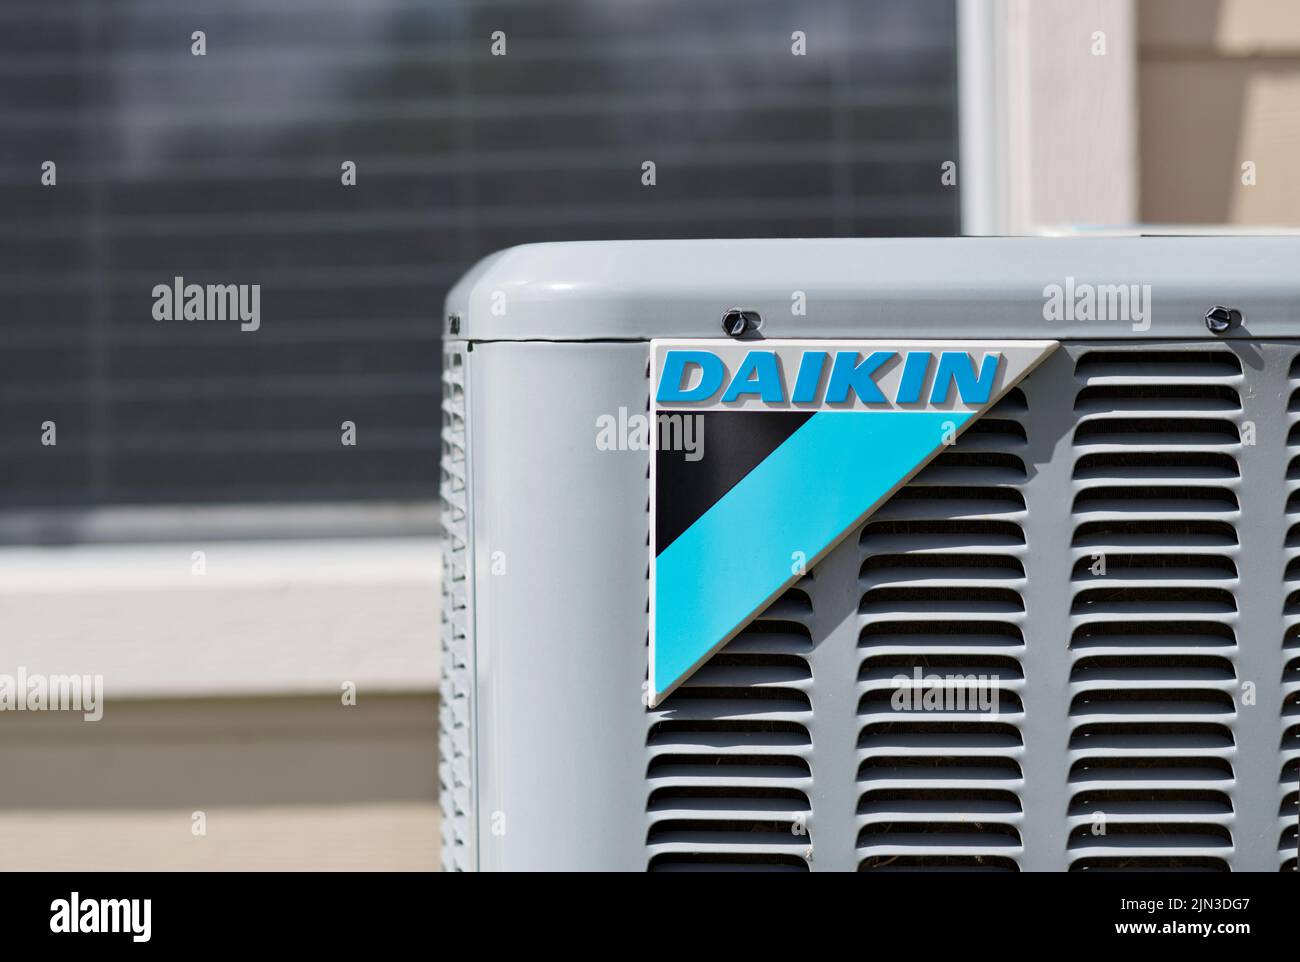 Houston, Texas USA 08-08-2022: Daikin air conditioner unit, corner view at eye level with logo and domestic window in the background. Stock Photo